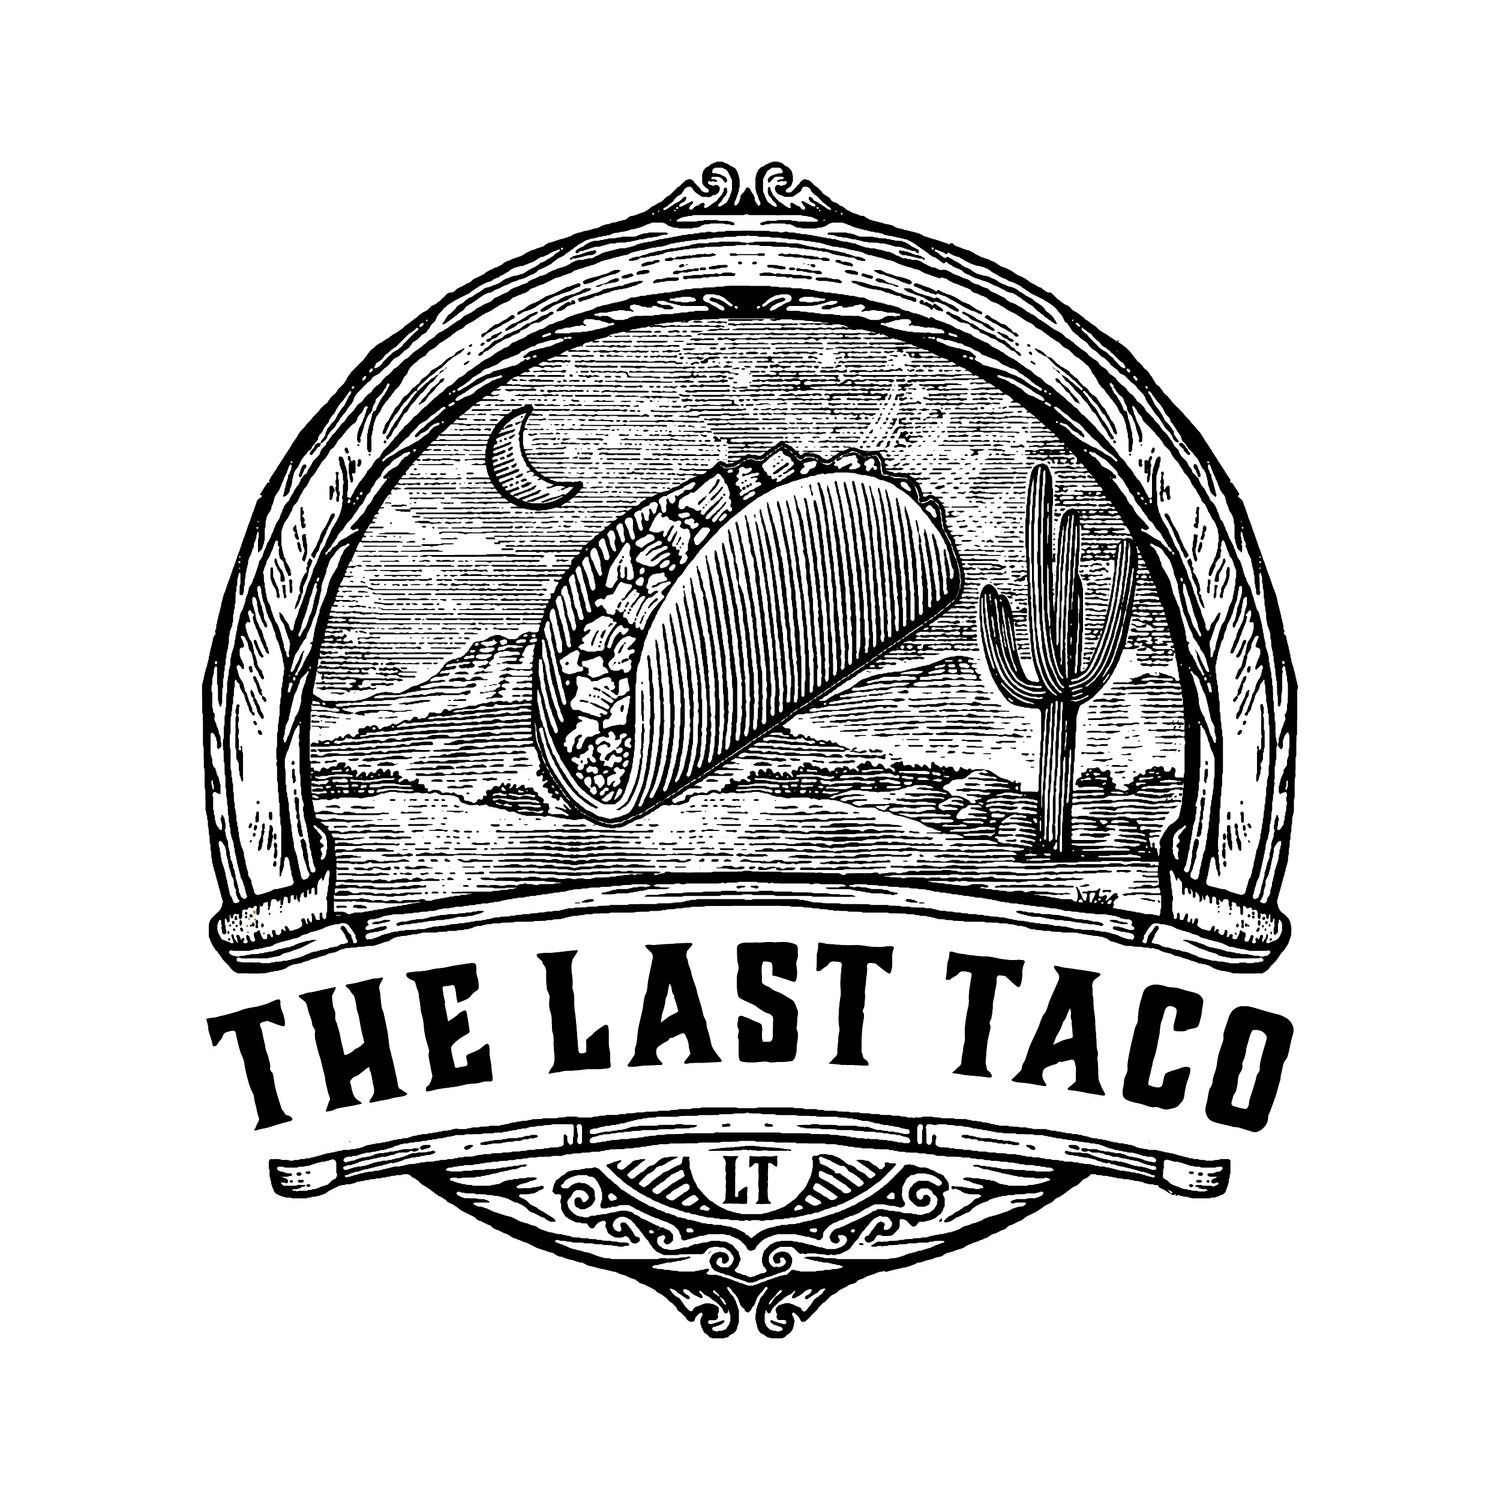 THE LAST TACO STAND